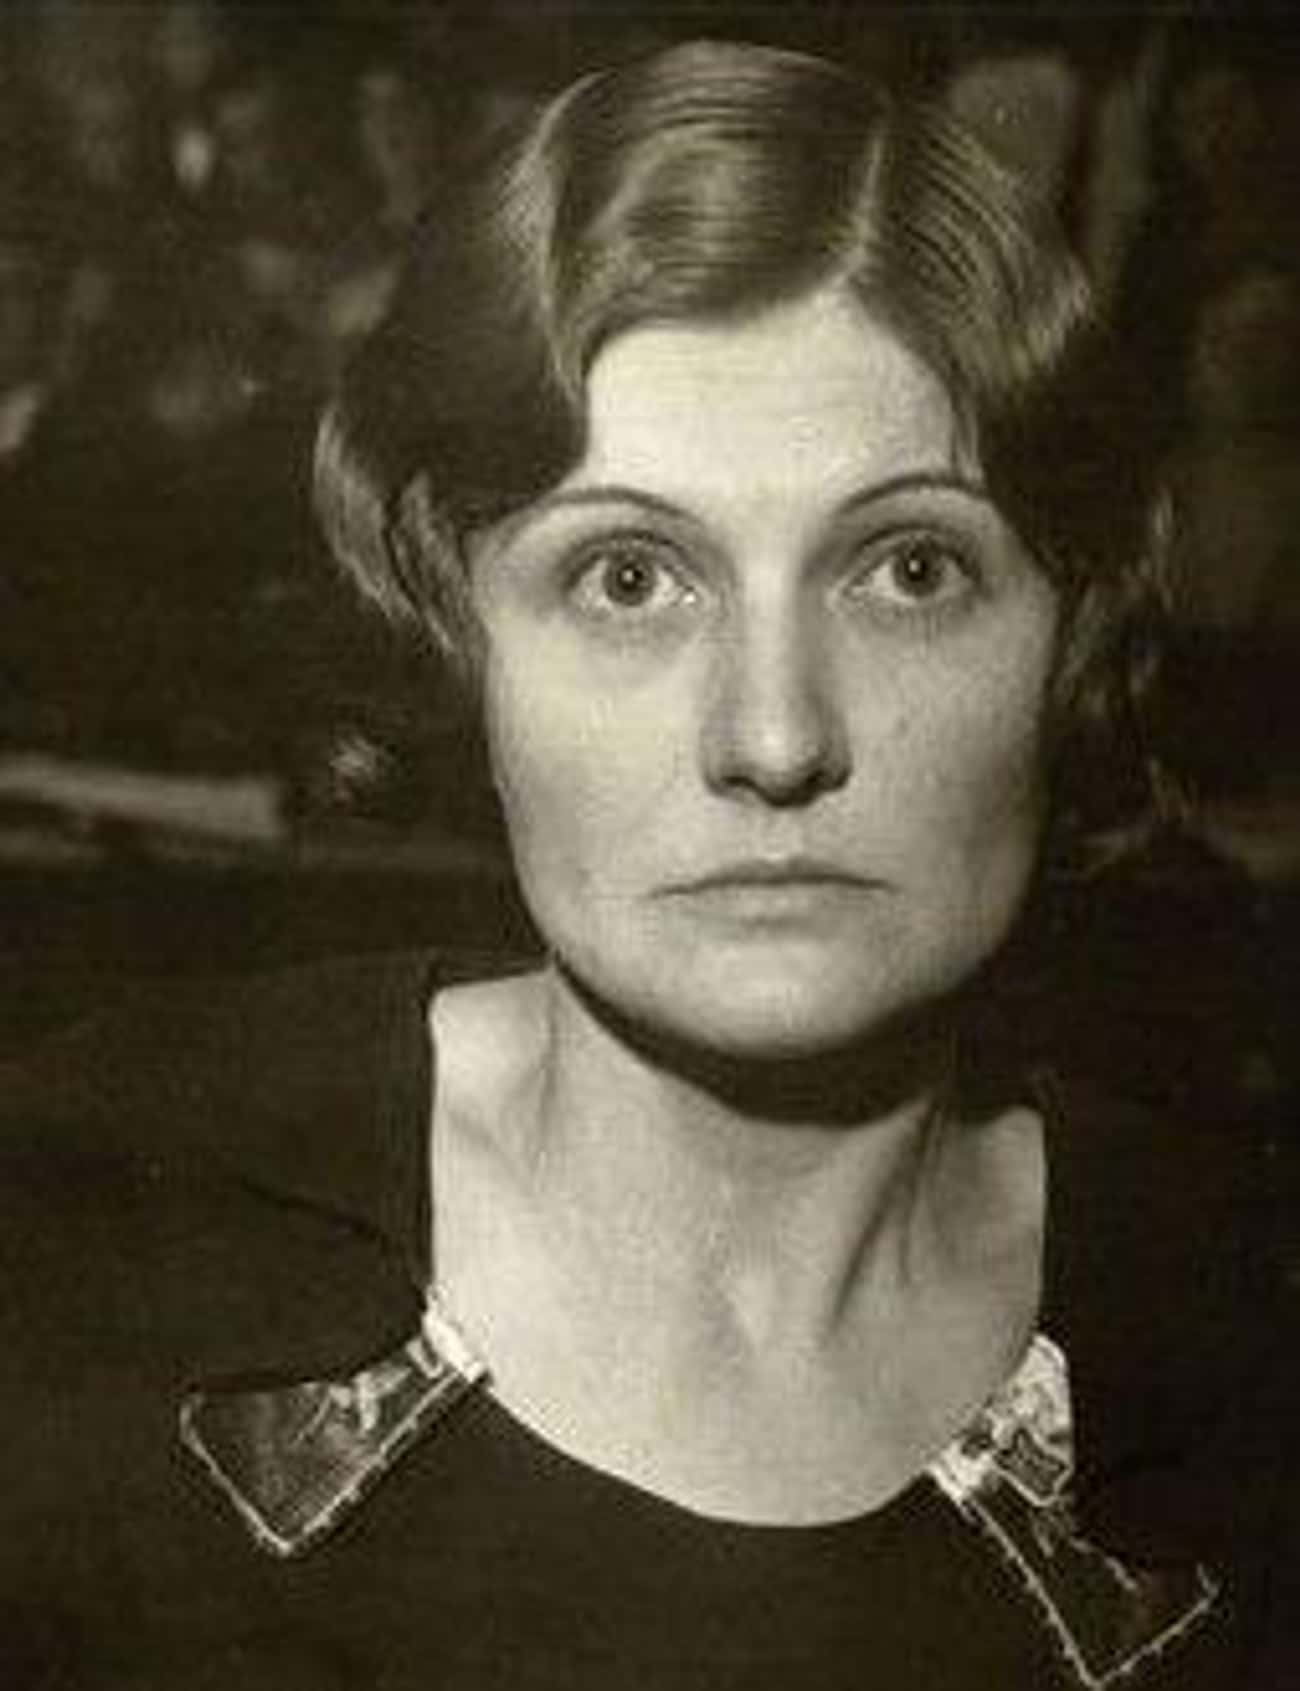 Winnie Ruth Judd Shot And Dismembered Two Women